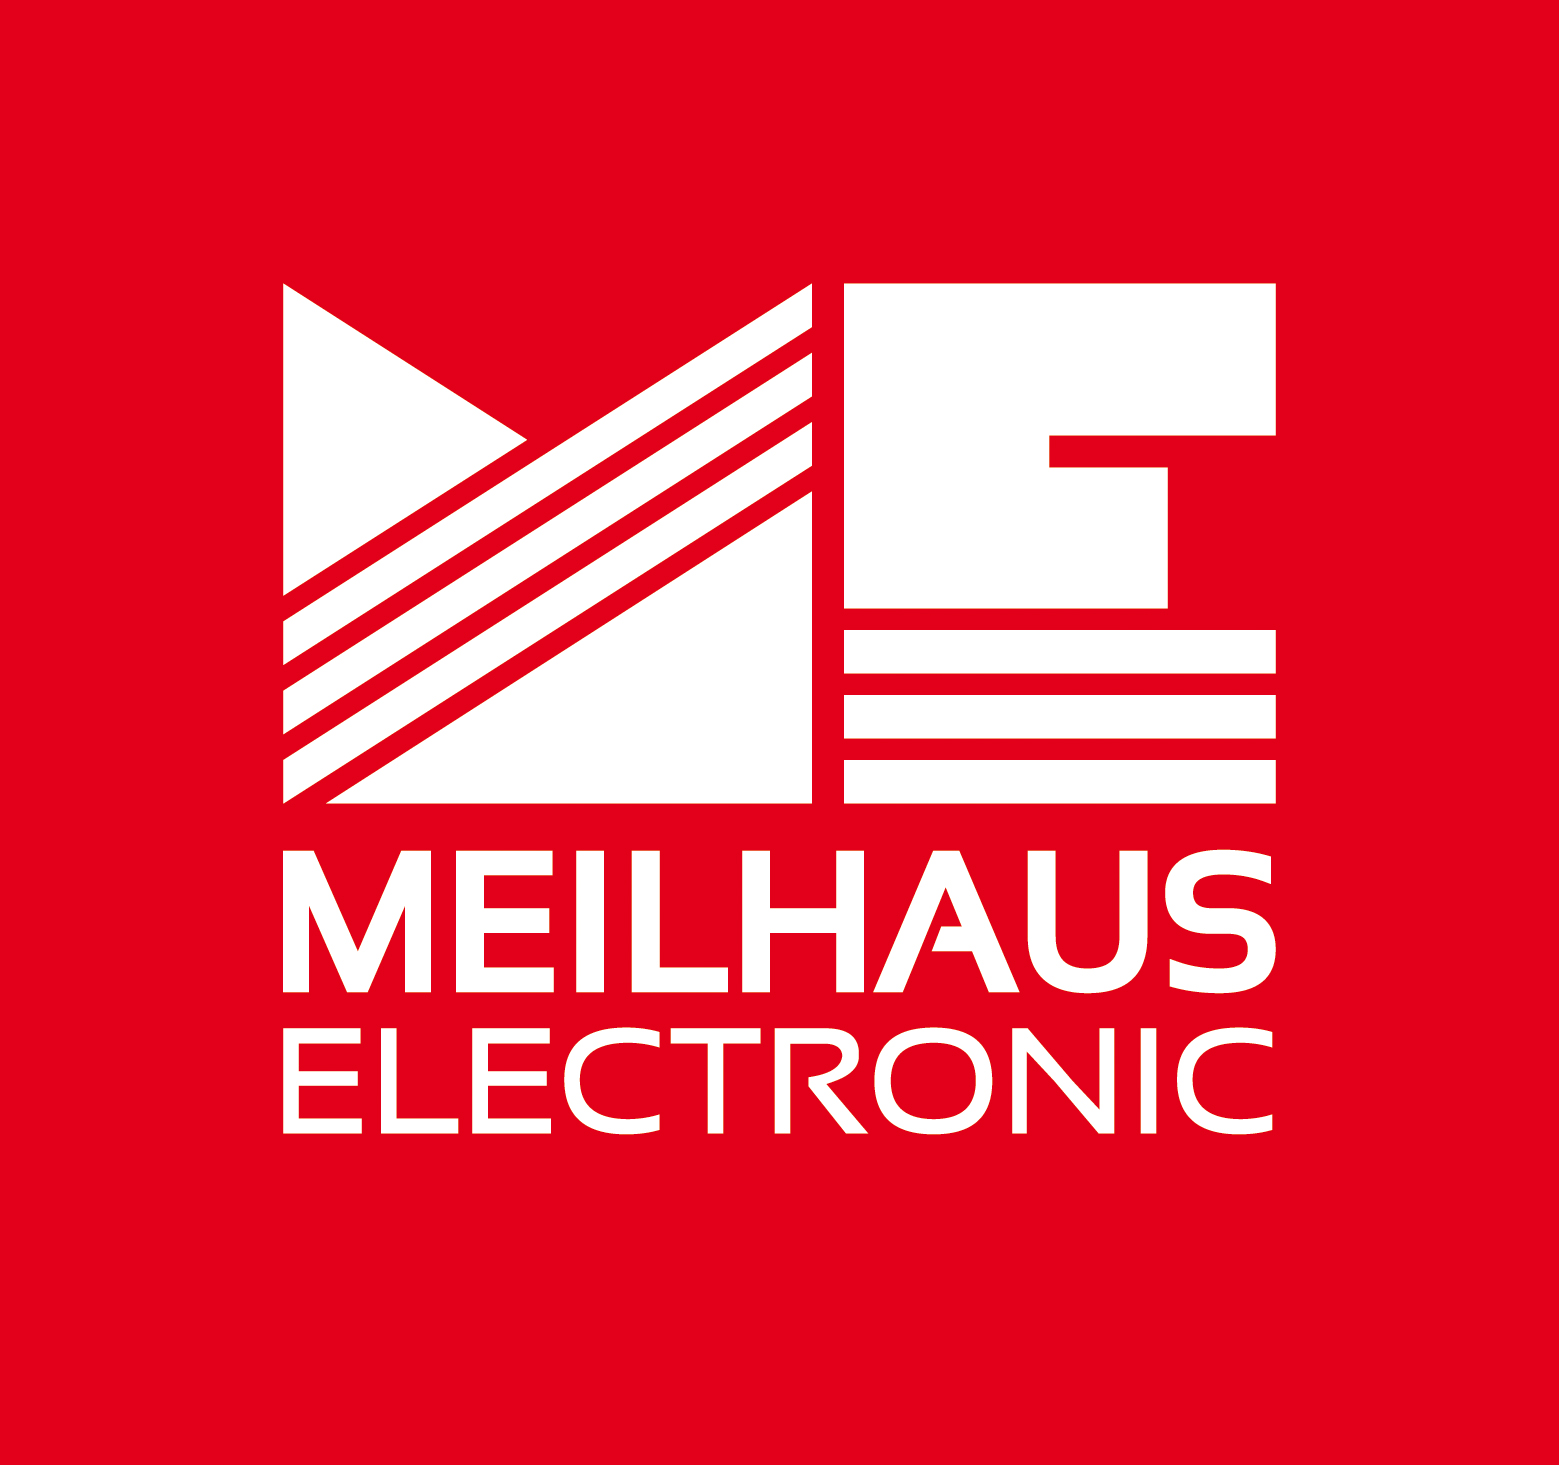 Featured image for “Meilhaus Electronic GmbH”